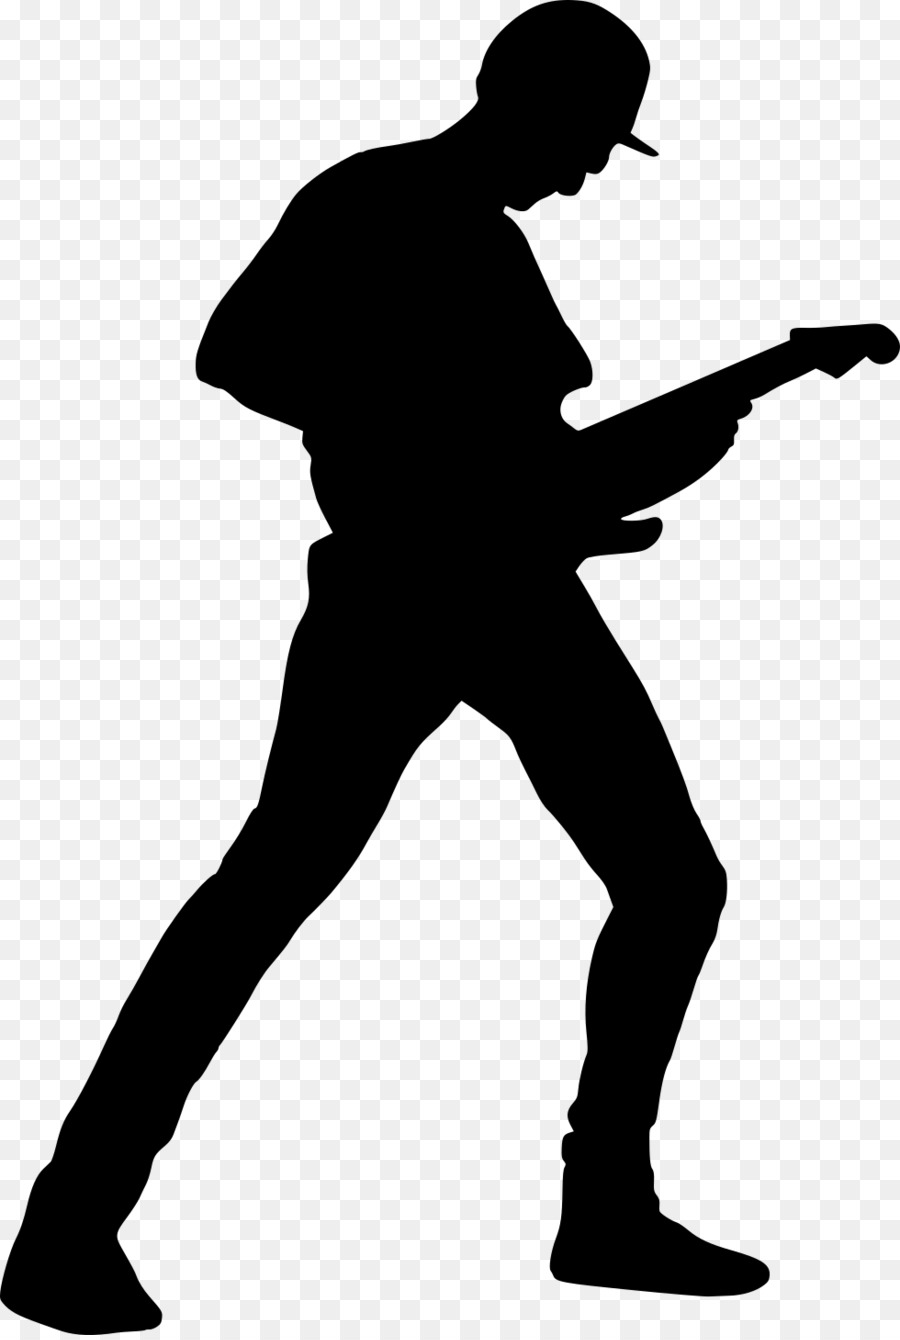 Portable Network Graphics Guitarist Electric guitar Clip art - soldiers silhouette png download - 980*1454 - Free Transparent Guitar png Download.